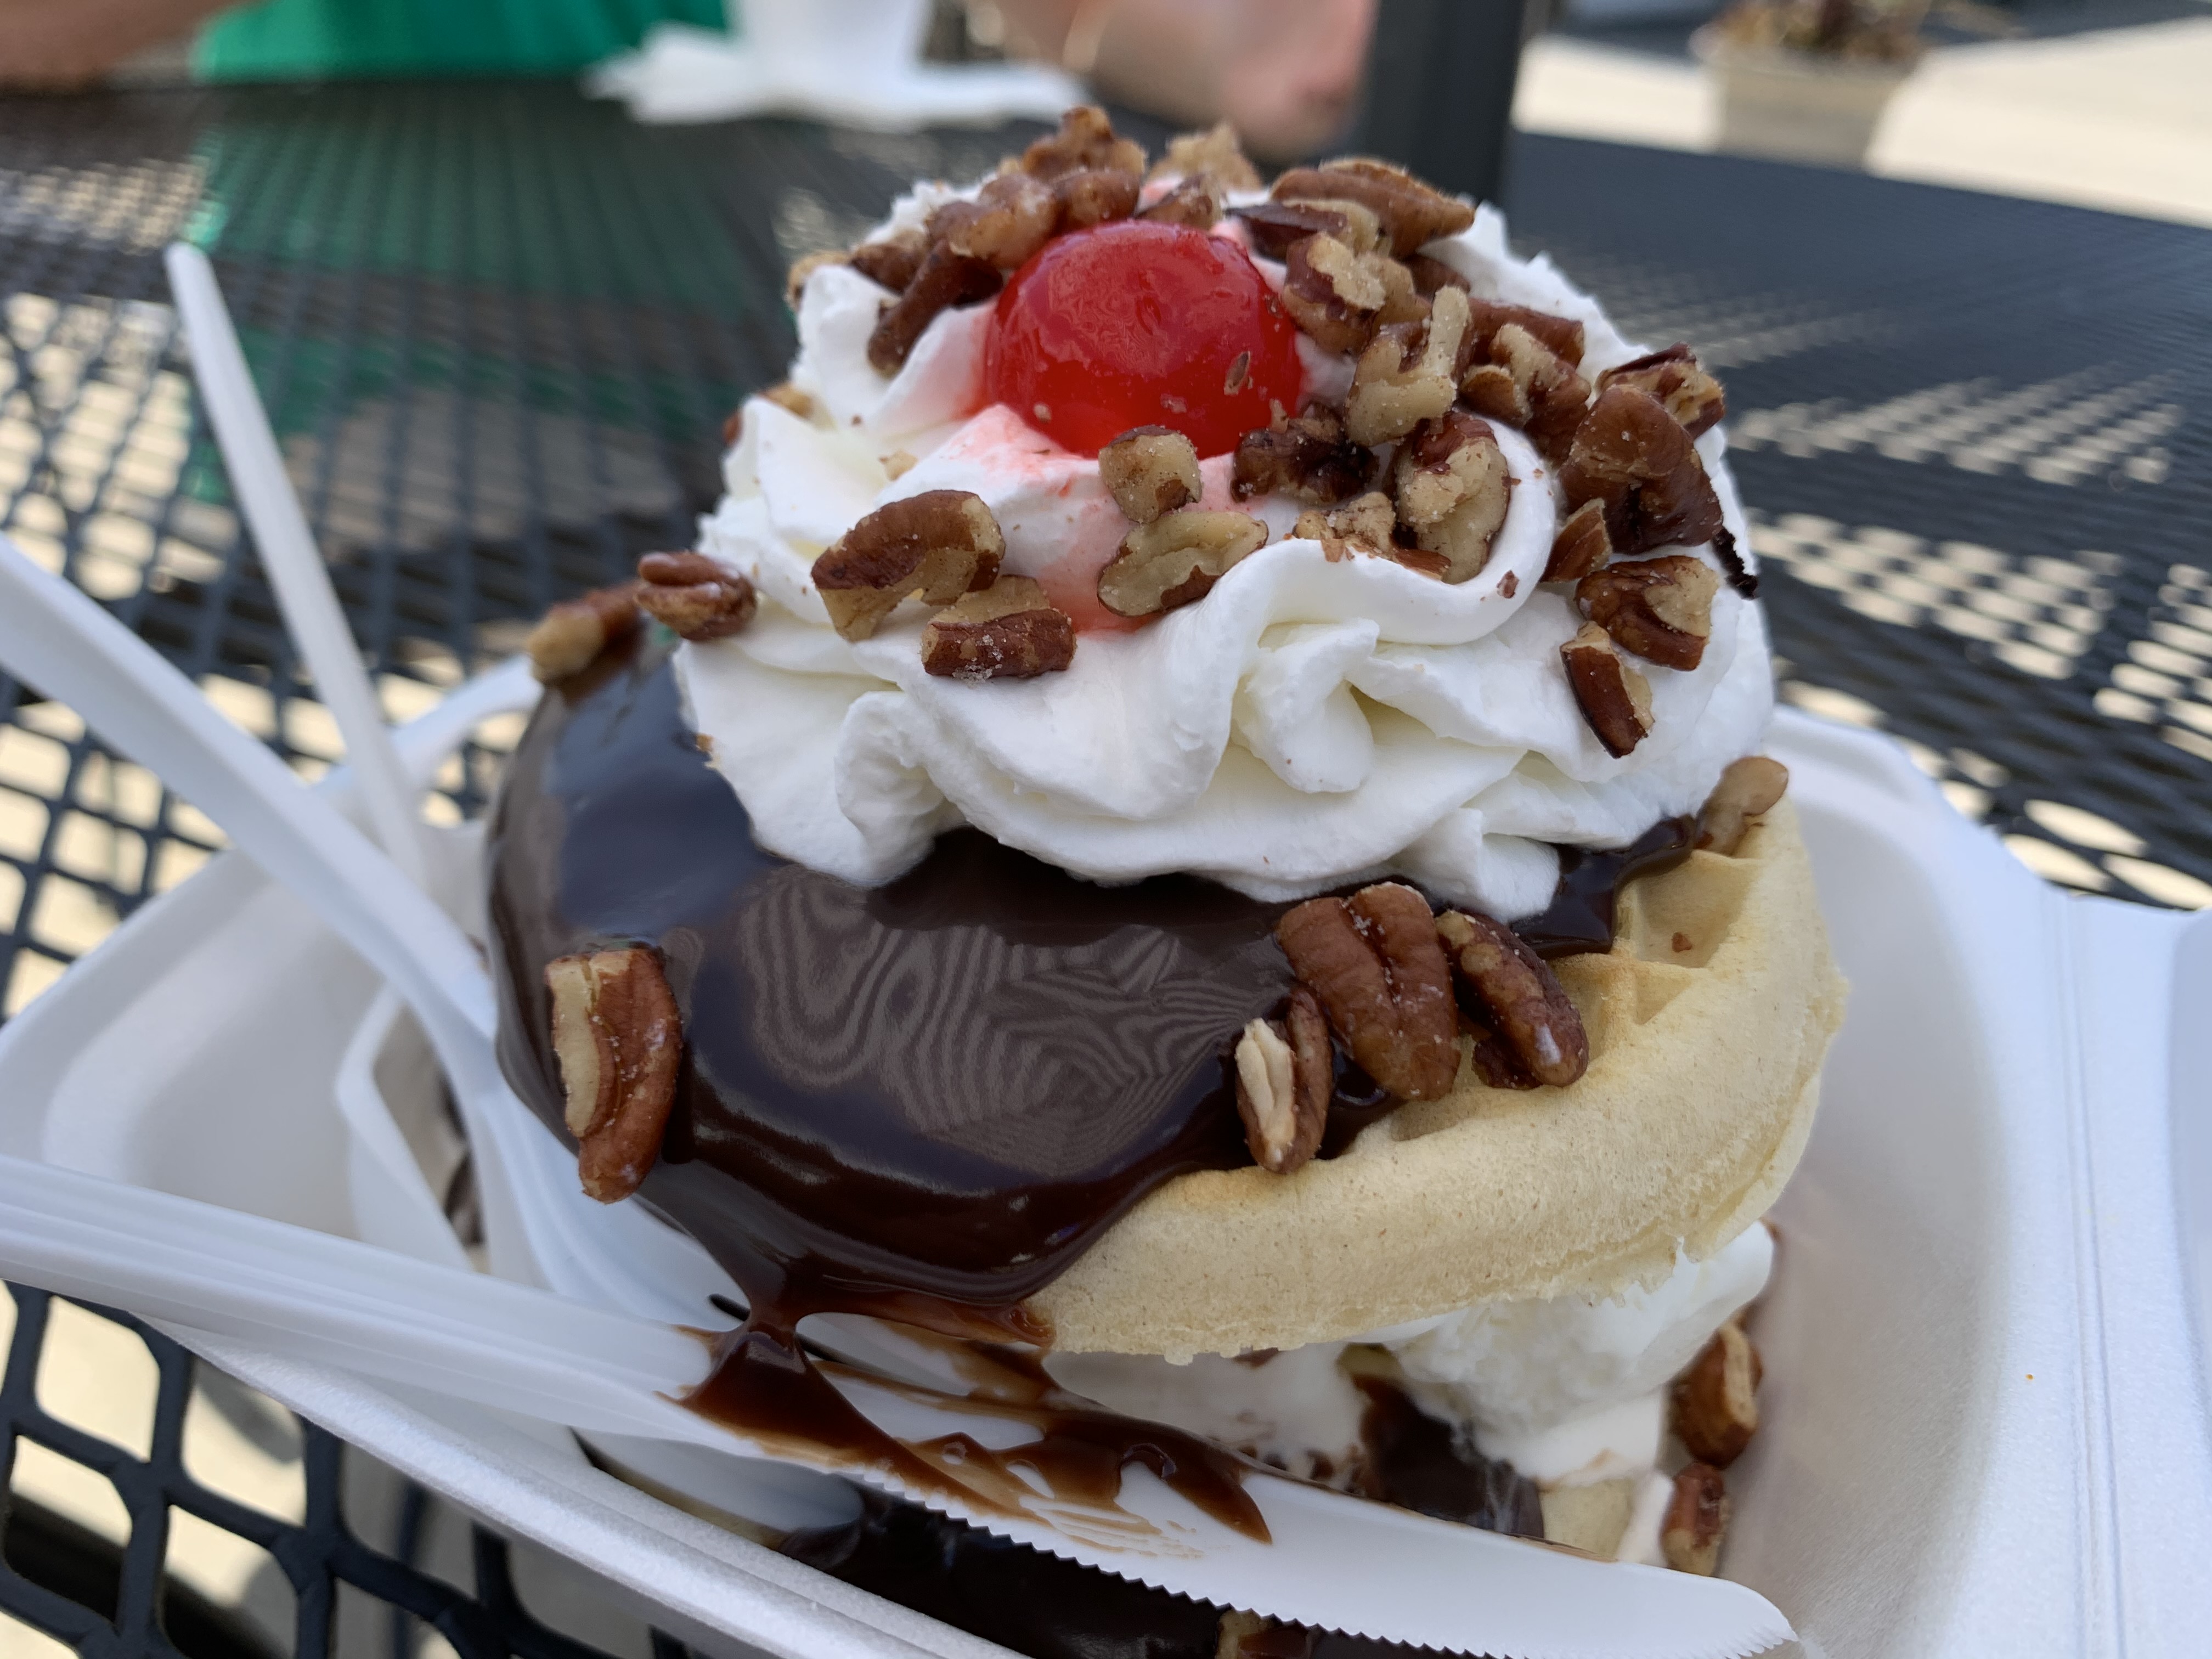 Downstate Illinois Road Trip Roundup - We All Scream For Ice Cream! 